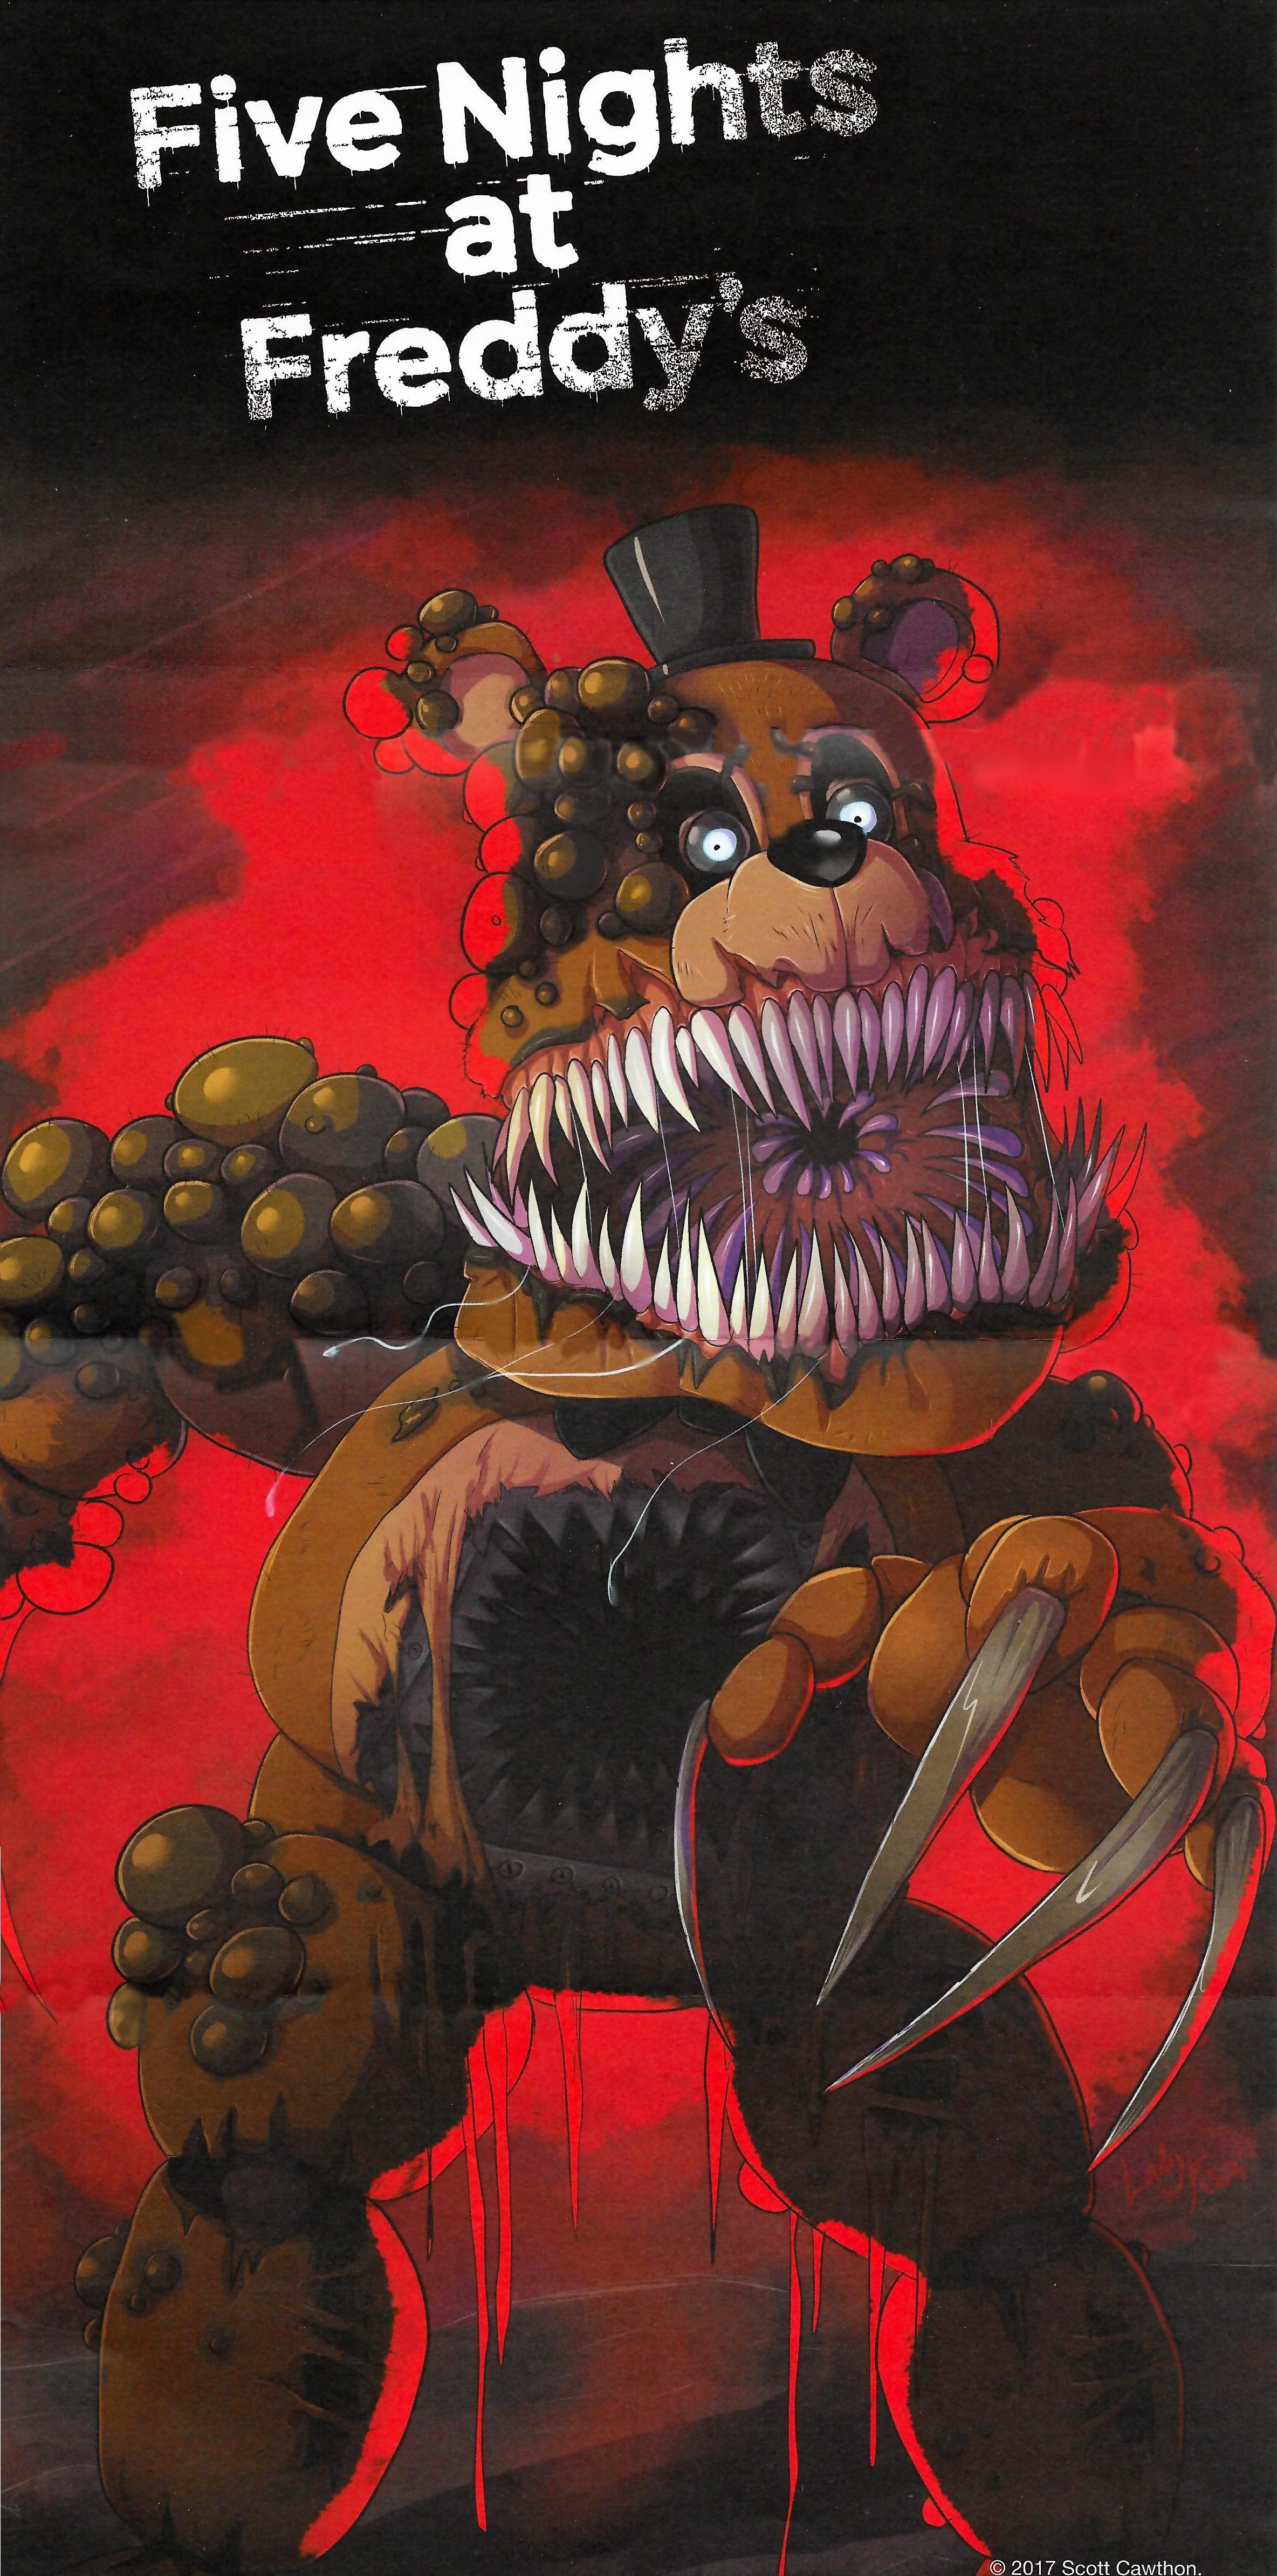 twisted freddy action figure